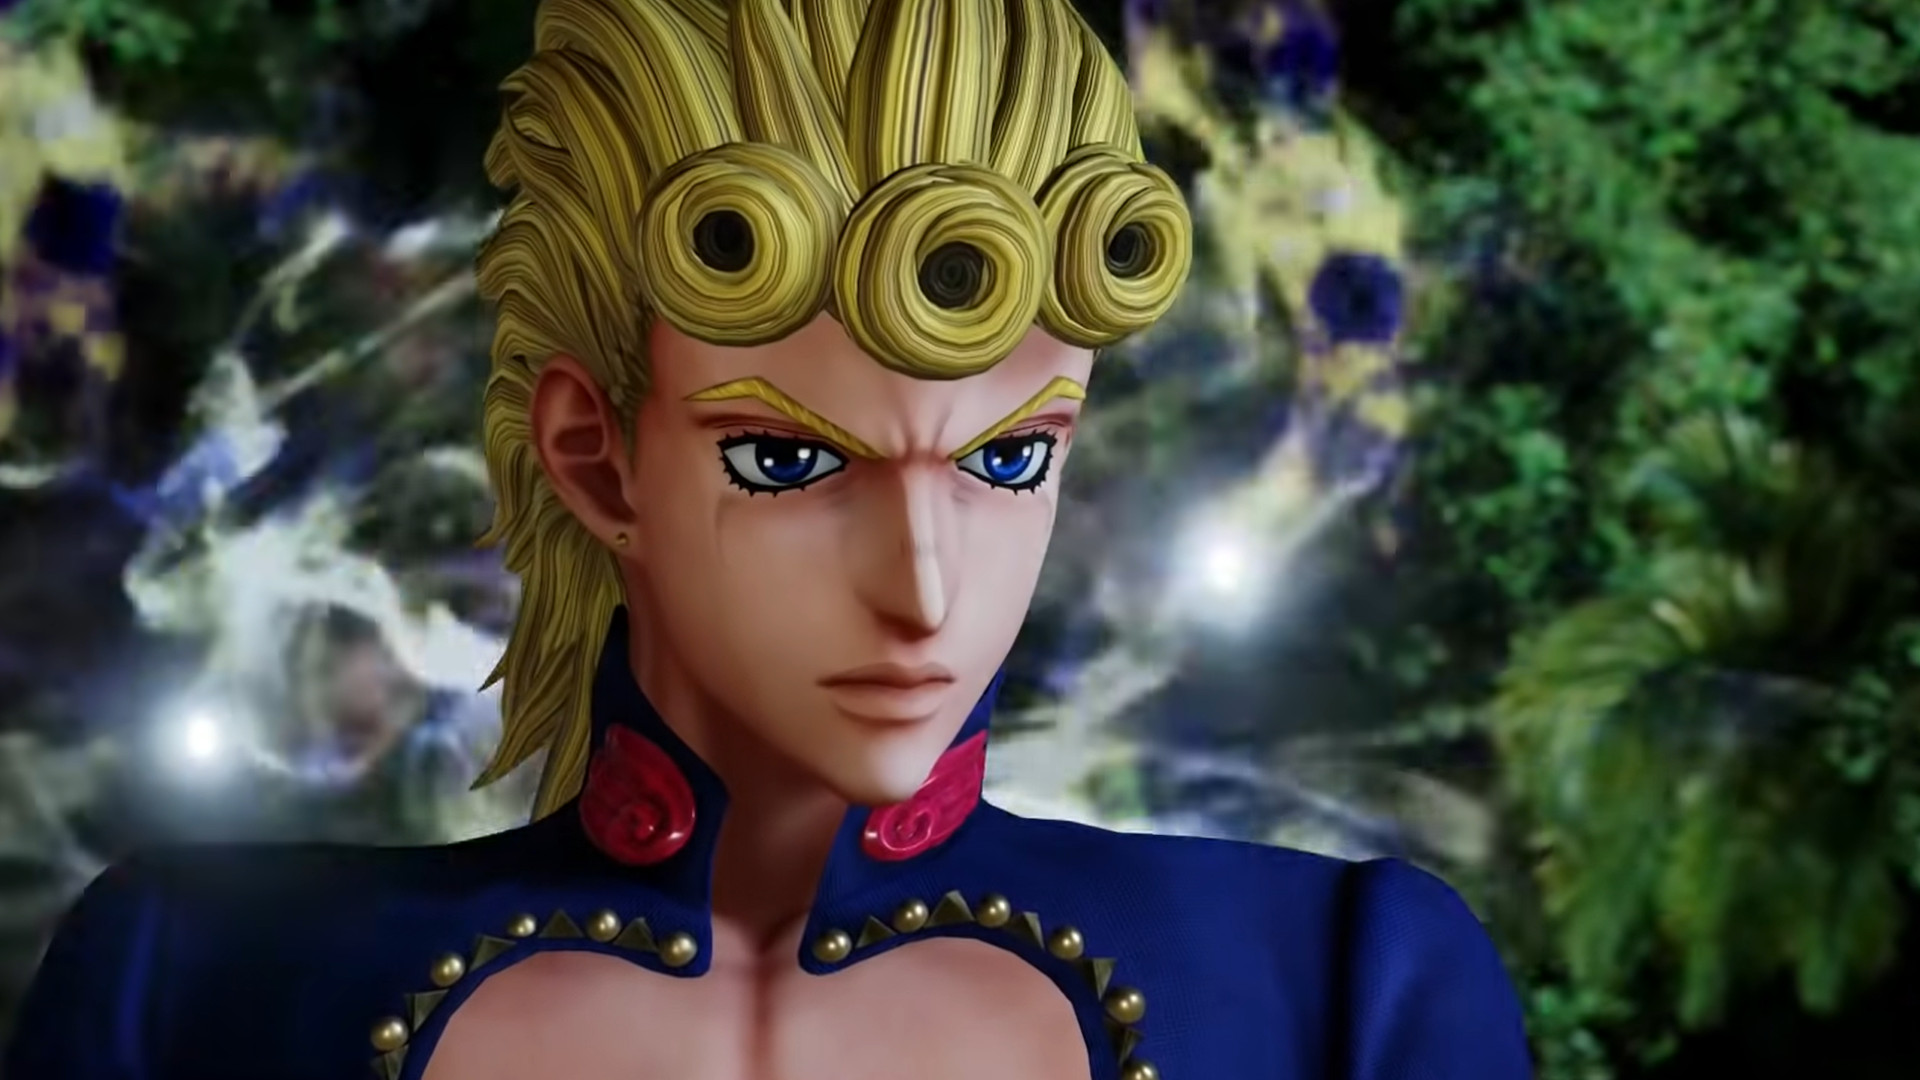 Jump Force Devs Accidentally Released Playable Unfinished Dlc Characters Pcgamesn A page for describing characters: jump force devs accidentally released